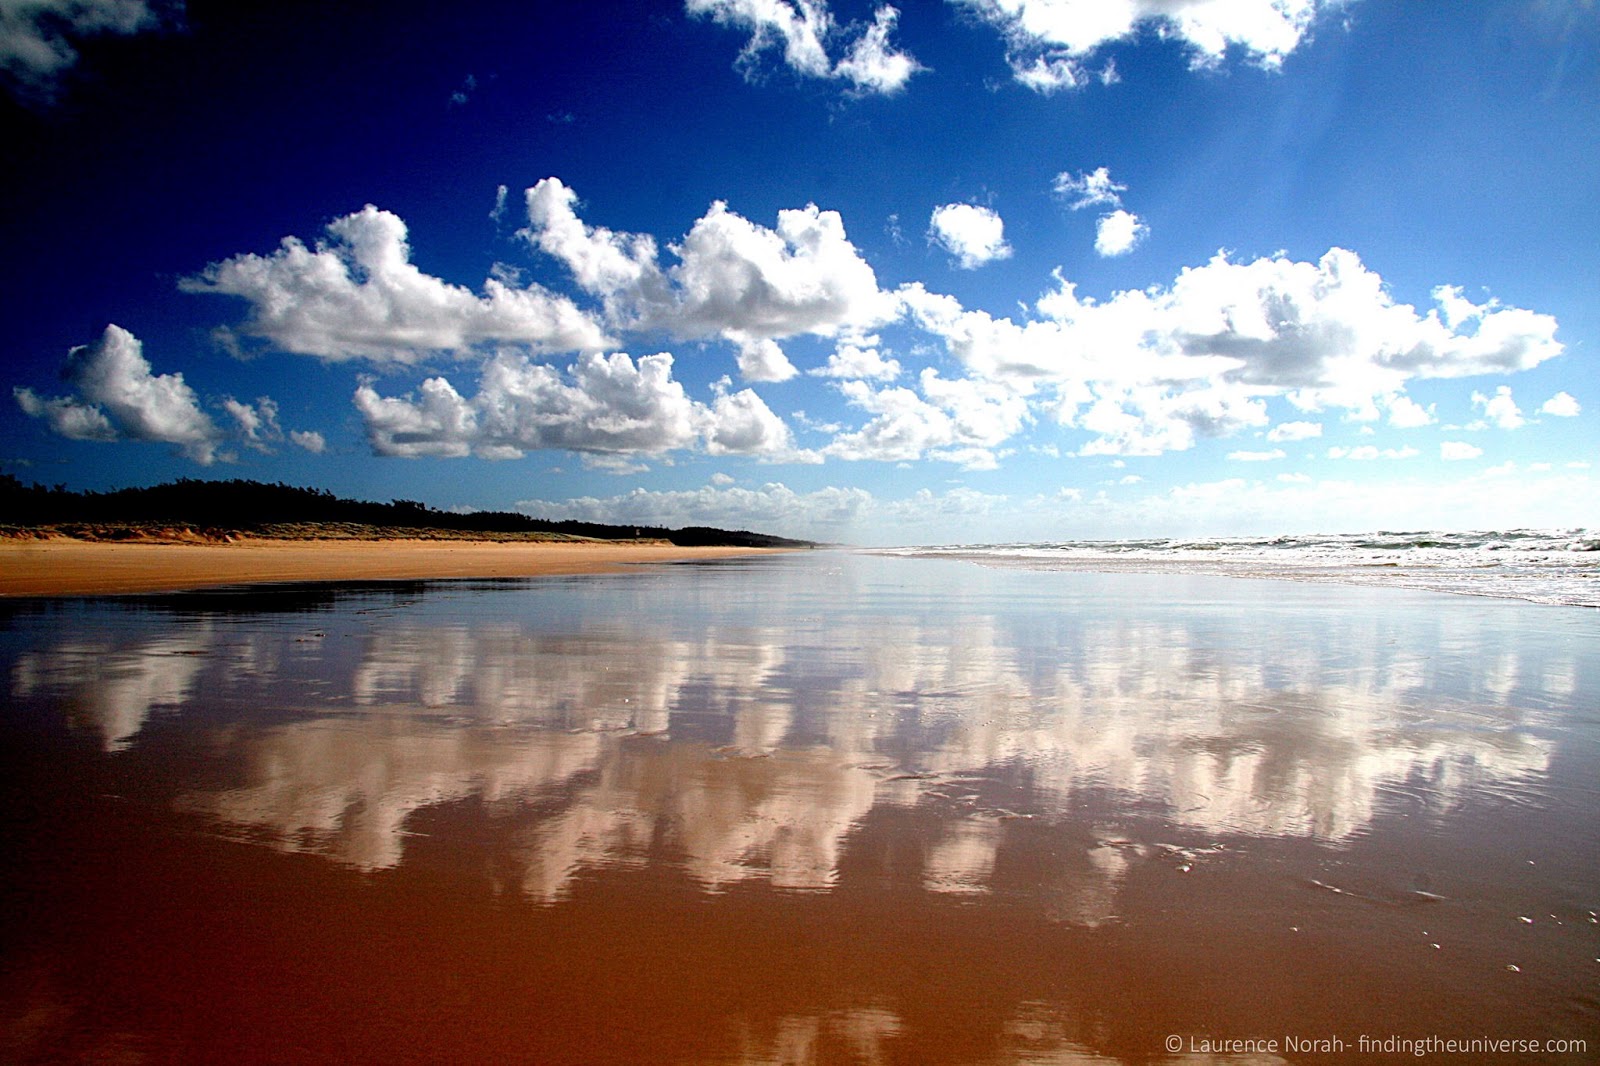 [Clouds%2520reflecting%2520in%2520the%2520water%2520on%2520the%2520Fraser%2520island%2520beach%2520-%2520Queensland%2520-%2520Australia%255B7%255D.jpg]